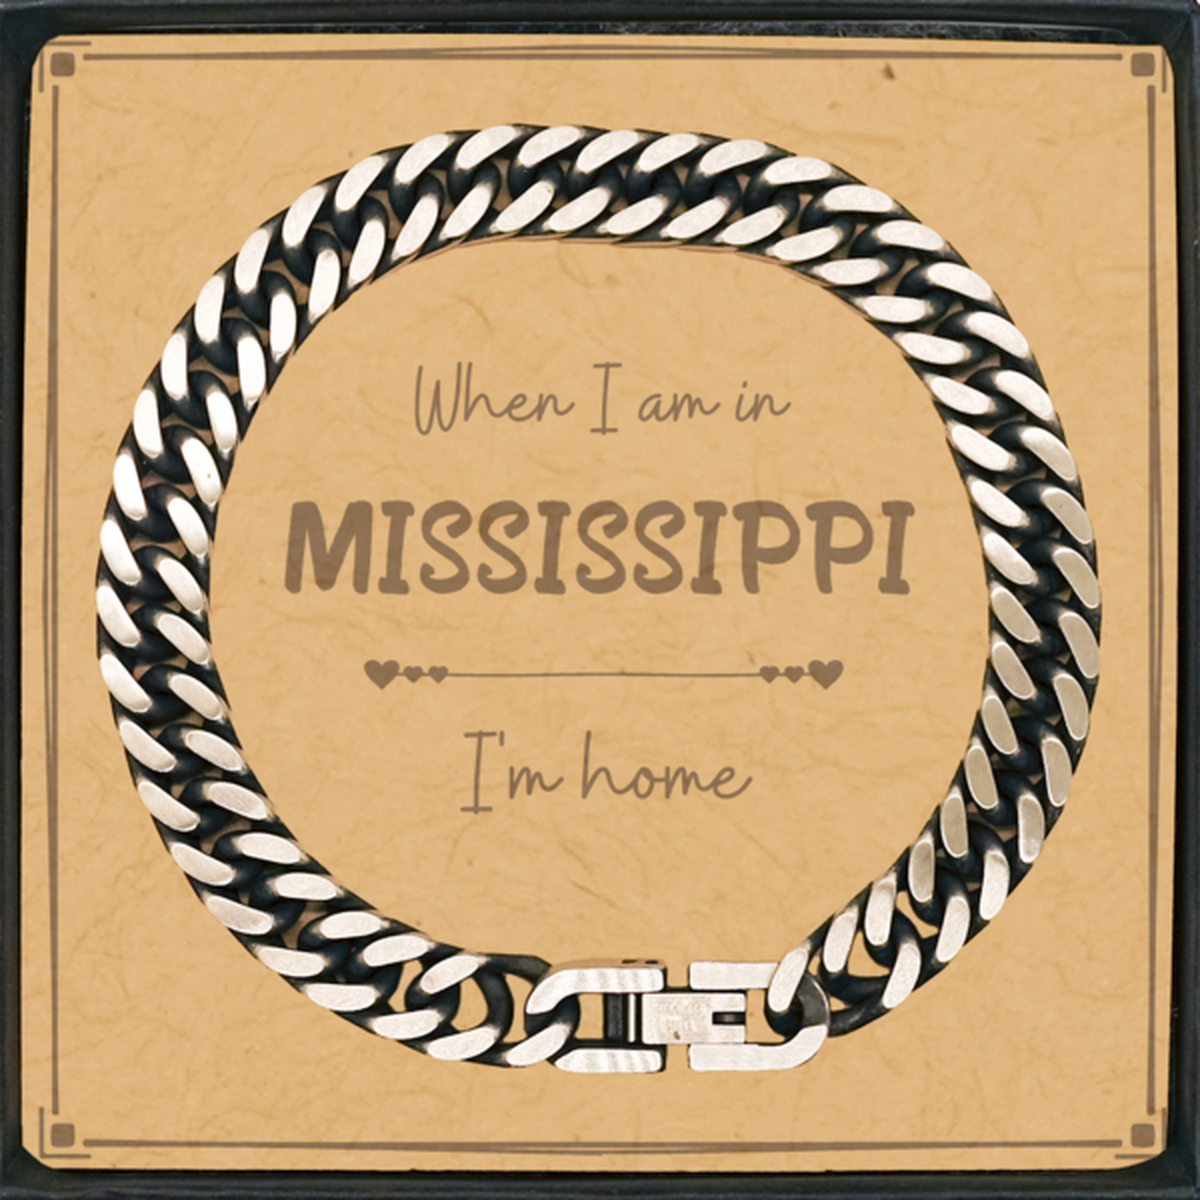 When I am in Mississippi I'm home Cuban Link Chain Bracelet, Message Card Gifts For Mississippi, State Mississippi Birthday Gifts for Friends Coworker